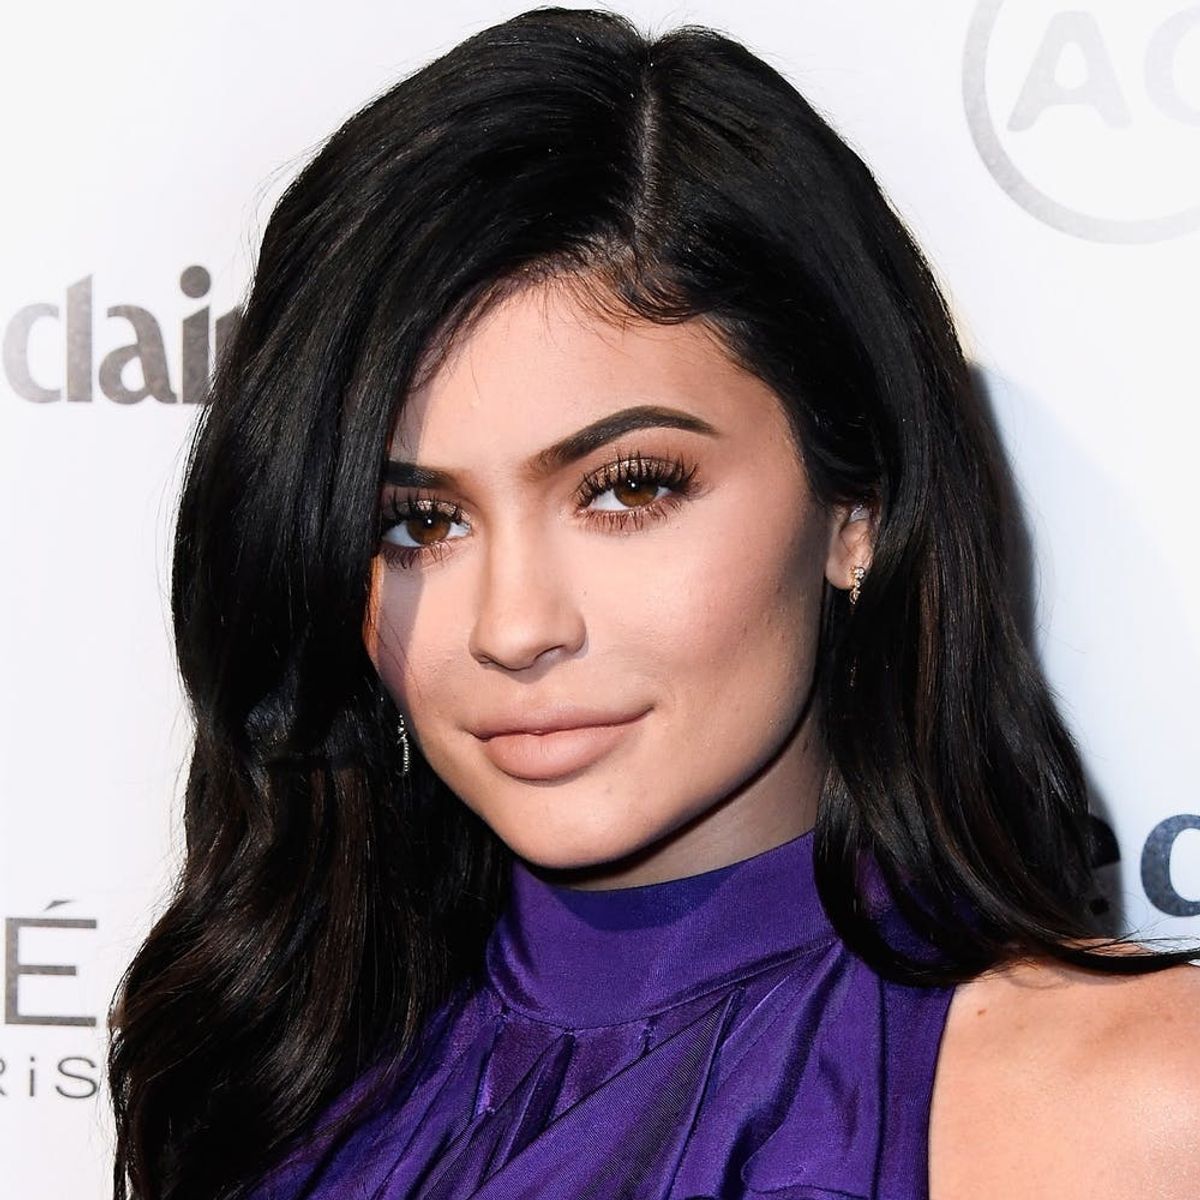 Kylie Jenner Just Received One of THE Most Extravagant Push Presents… Ever